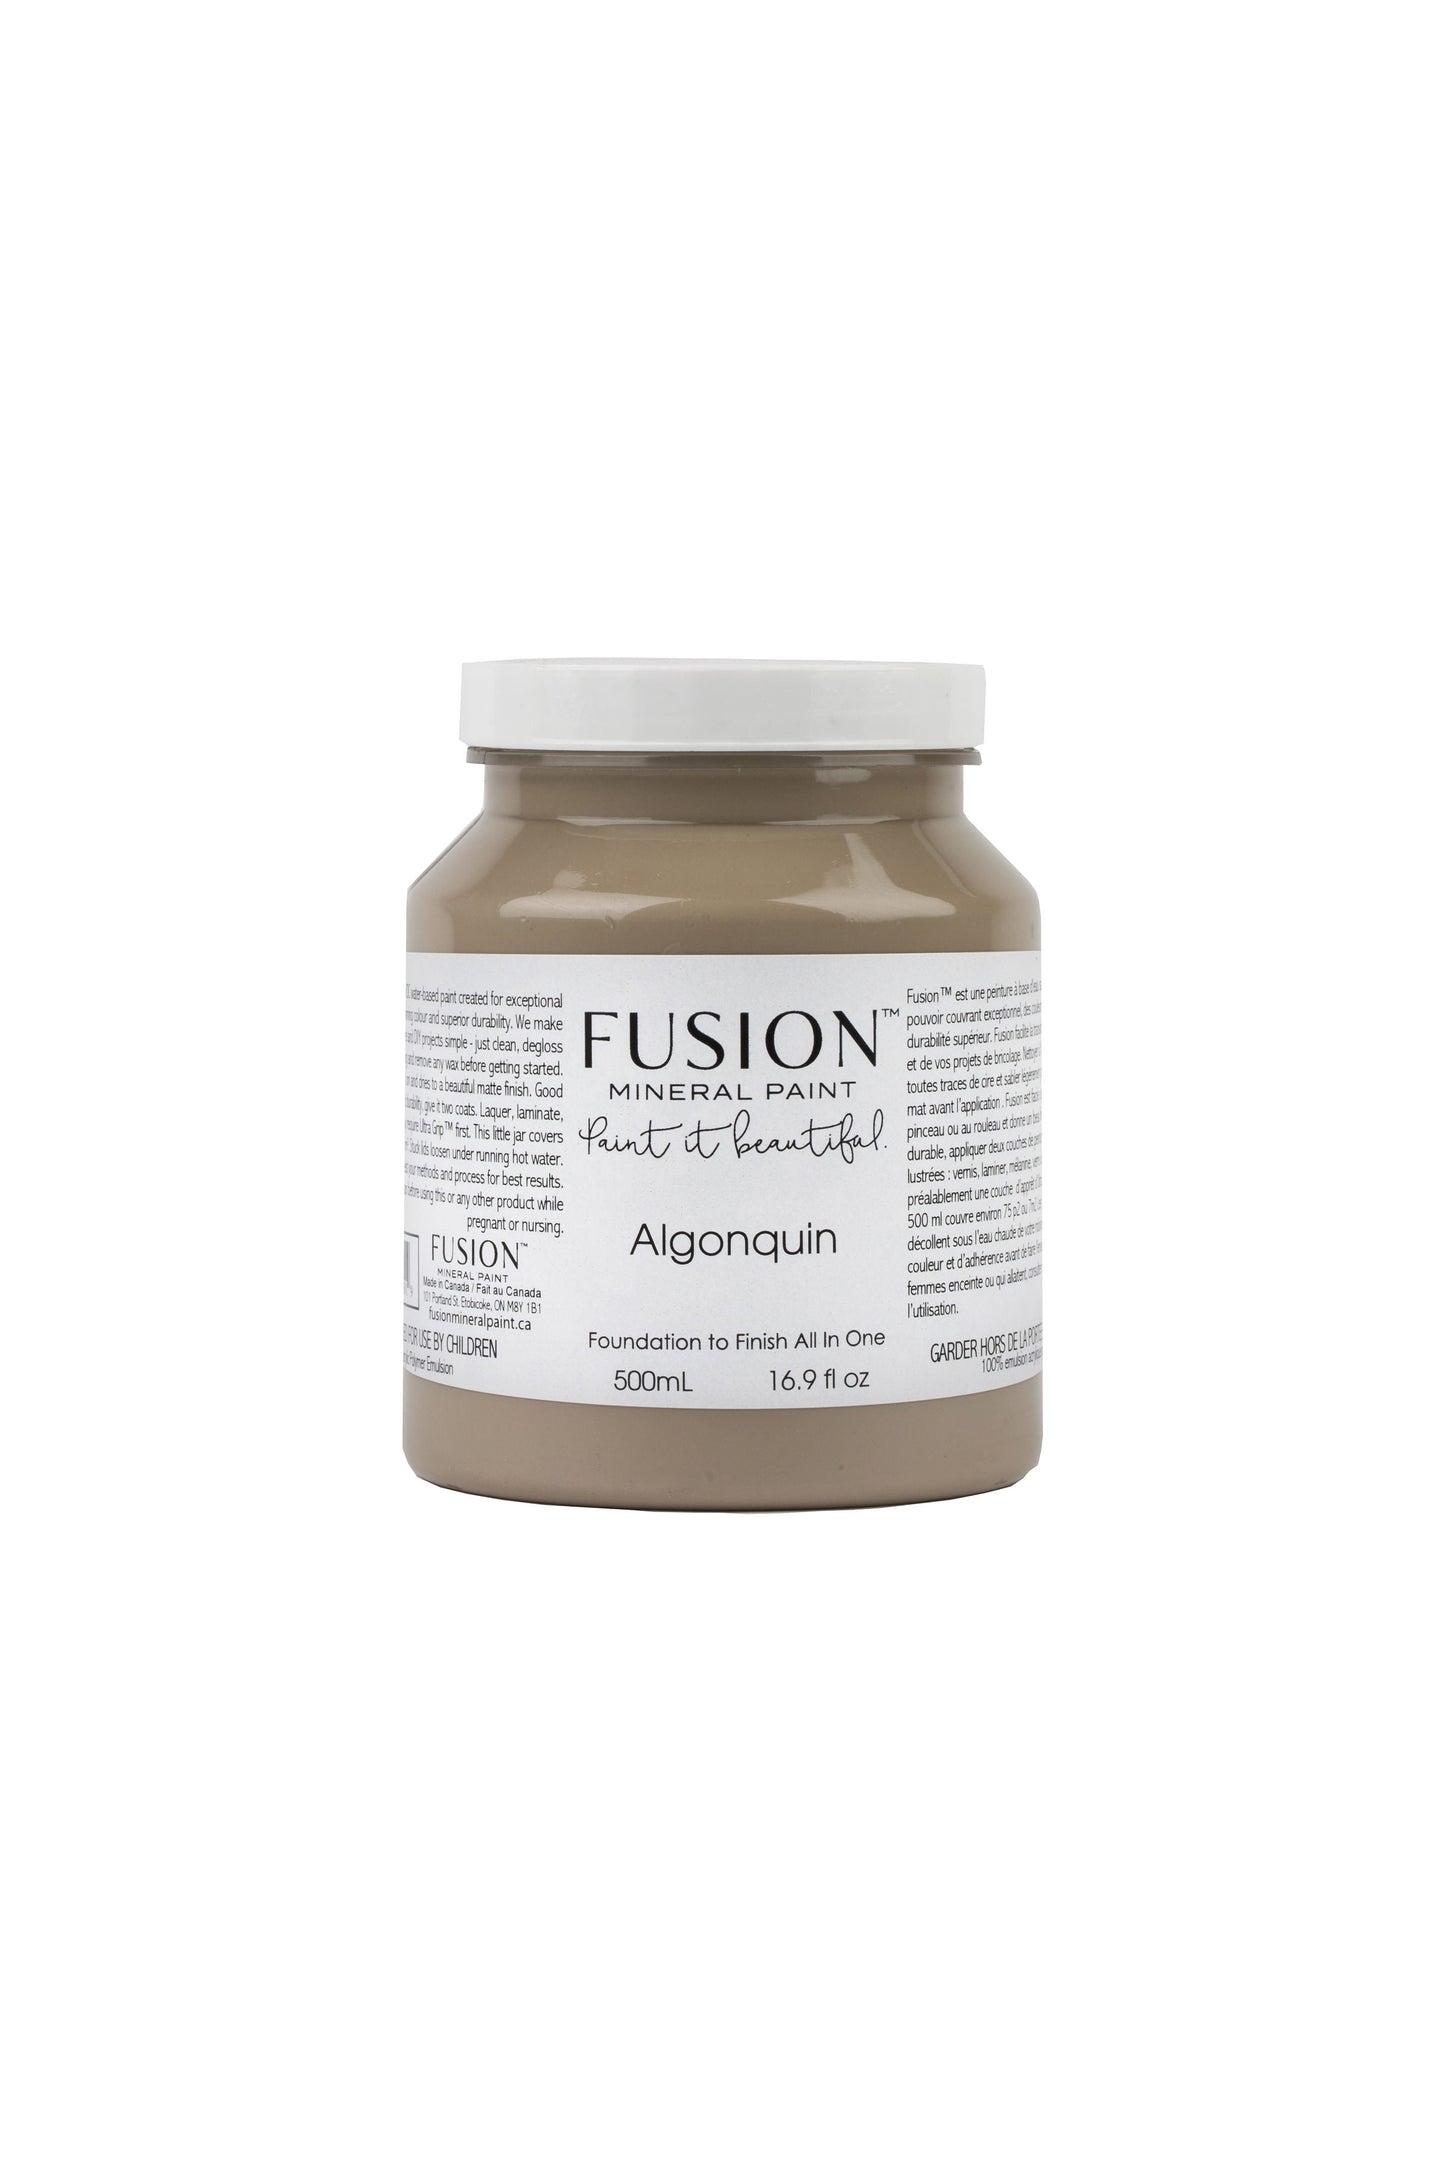 Algonquine Fusion Mineral Paint; Old to New Furniture & Decor